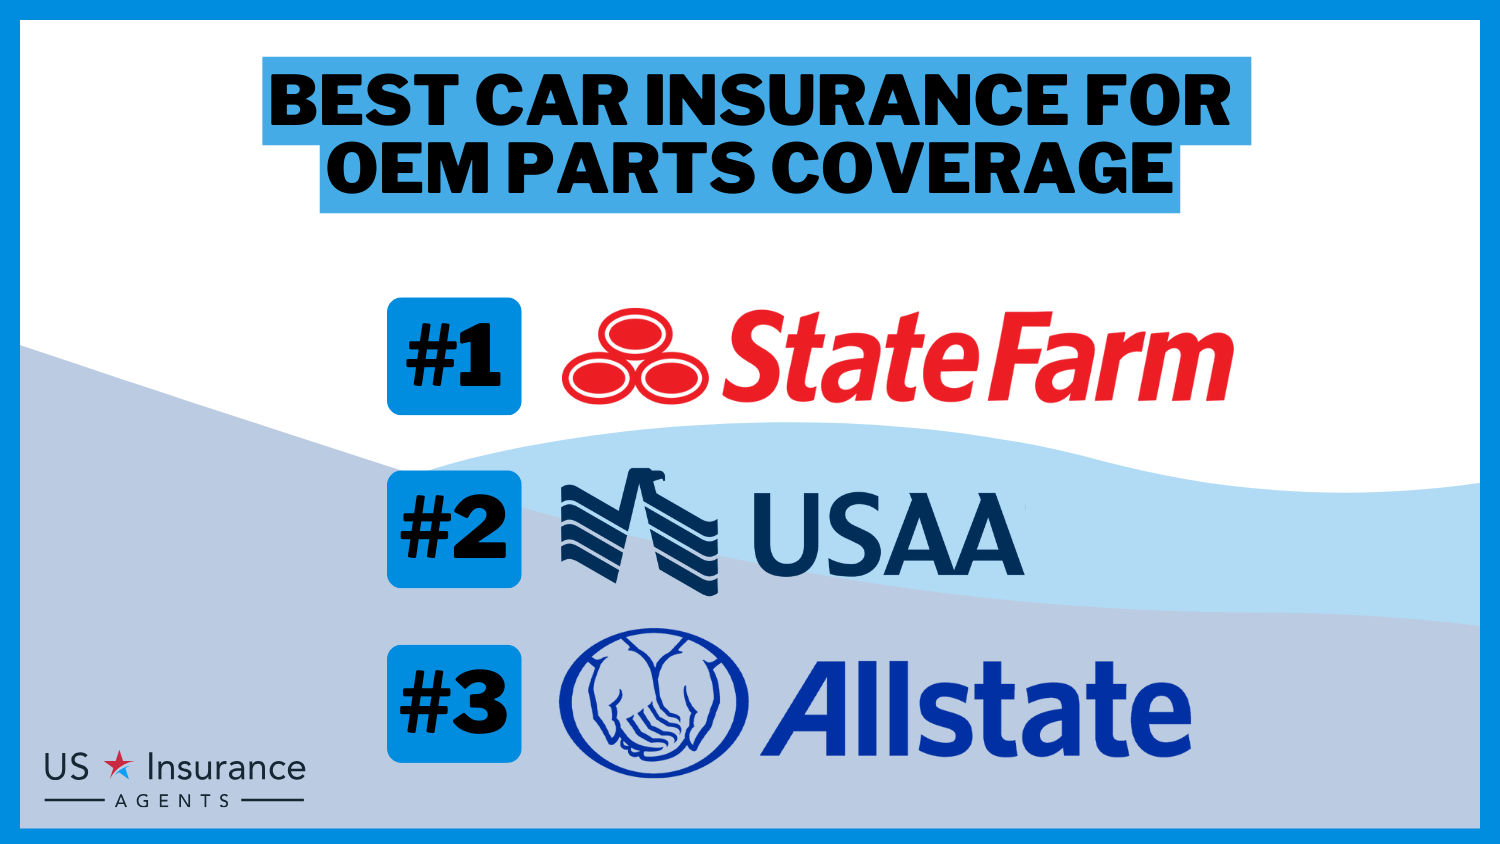 Best Car Insurance for OEM Parts: State Farm, USAA and Allstate